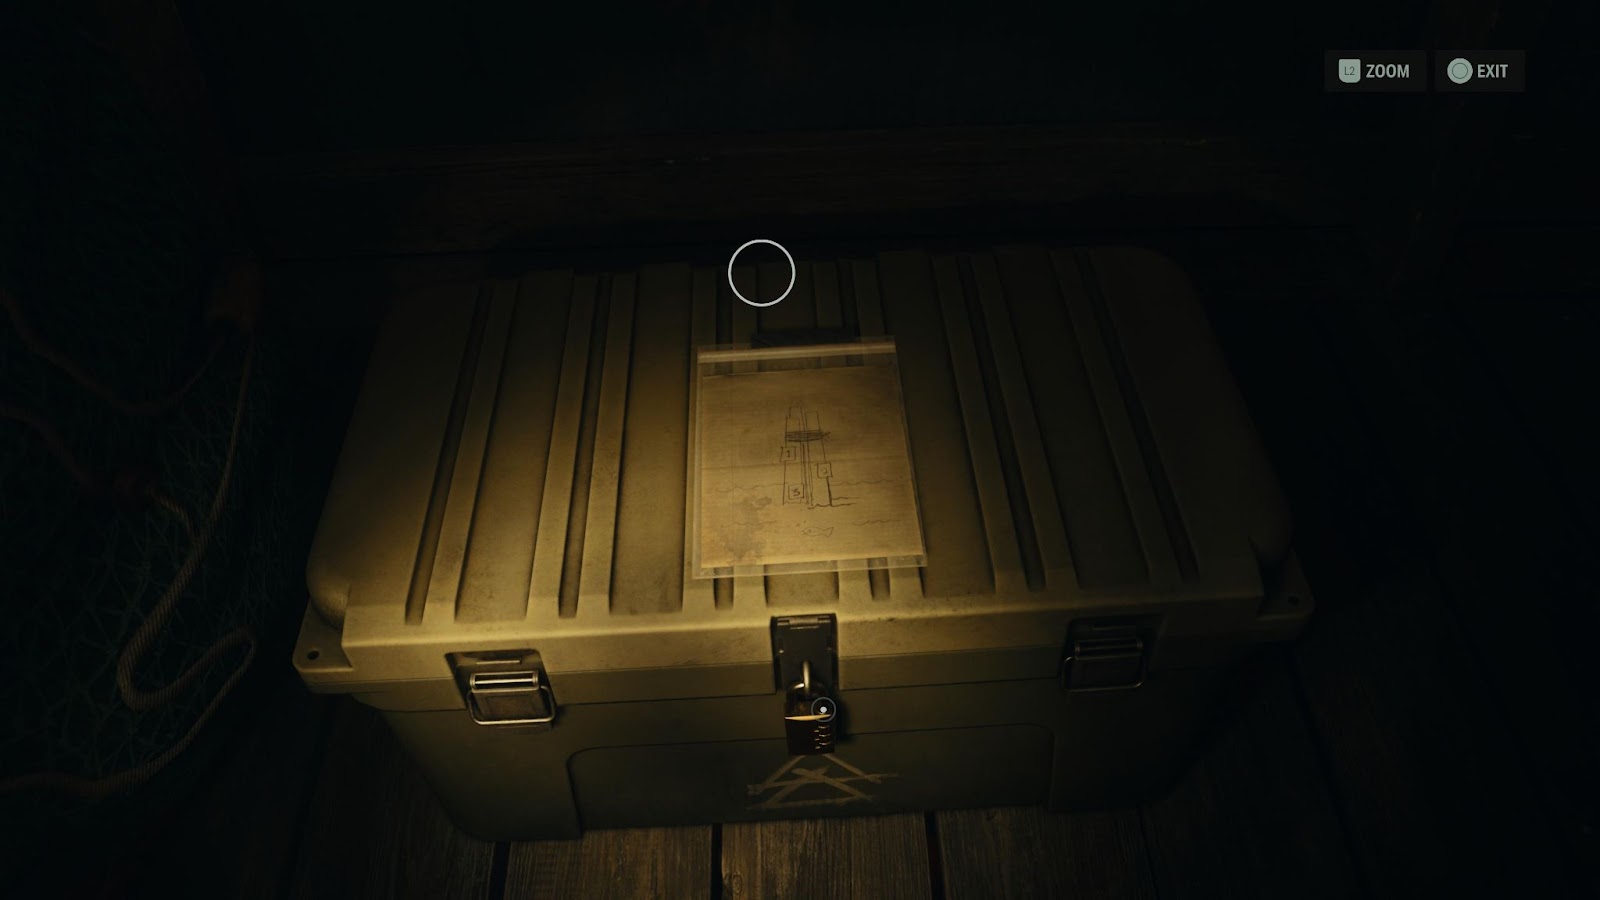 An in game screenshot of the harbor cult stash in Bright Falls from Alan Wake 2